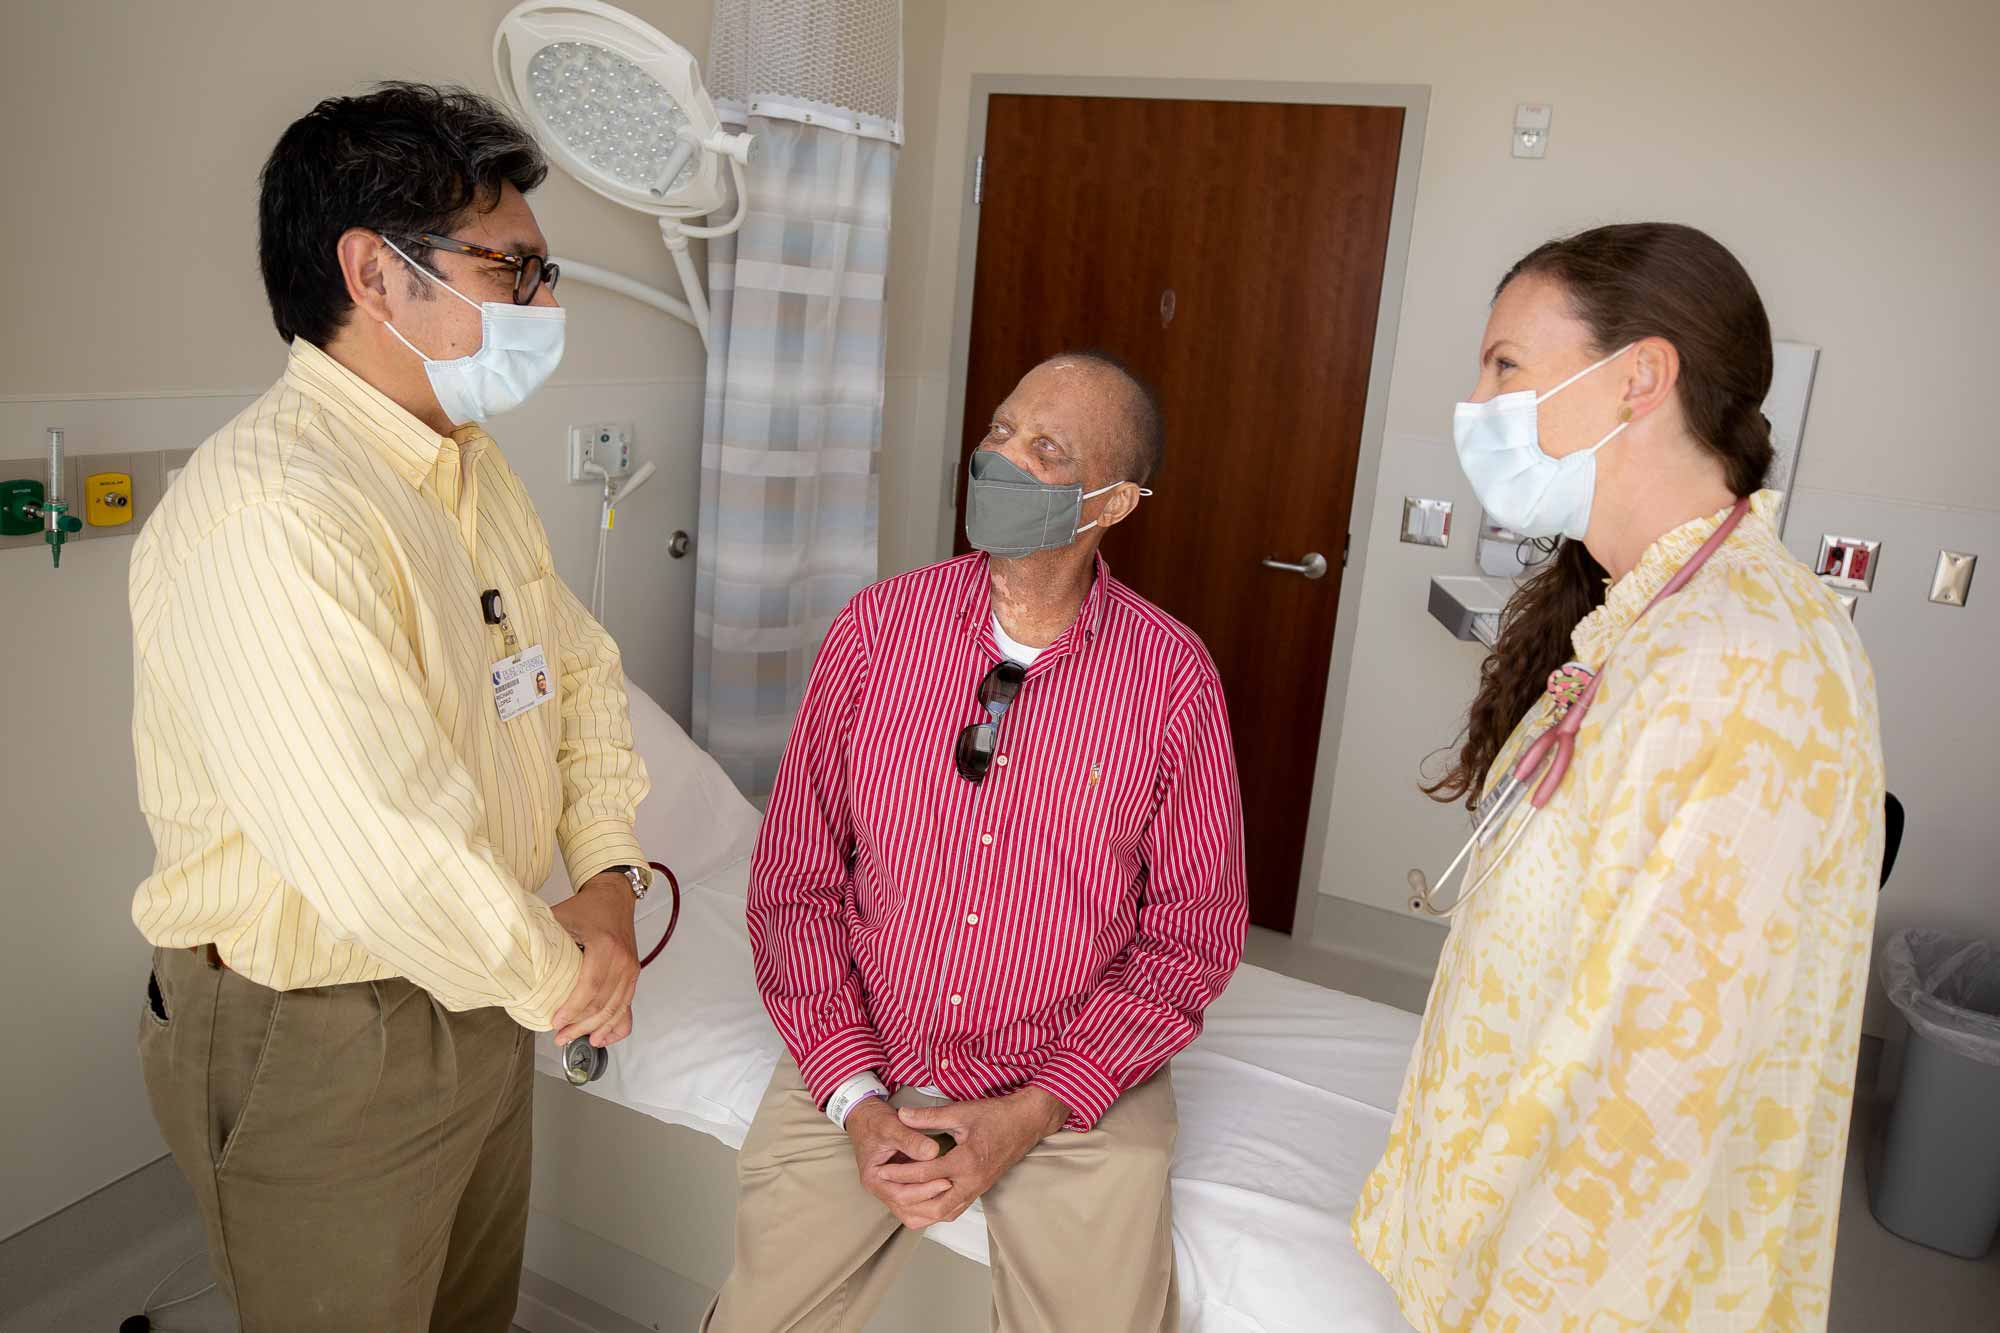 Two medical providers talk to a patient